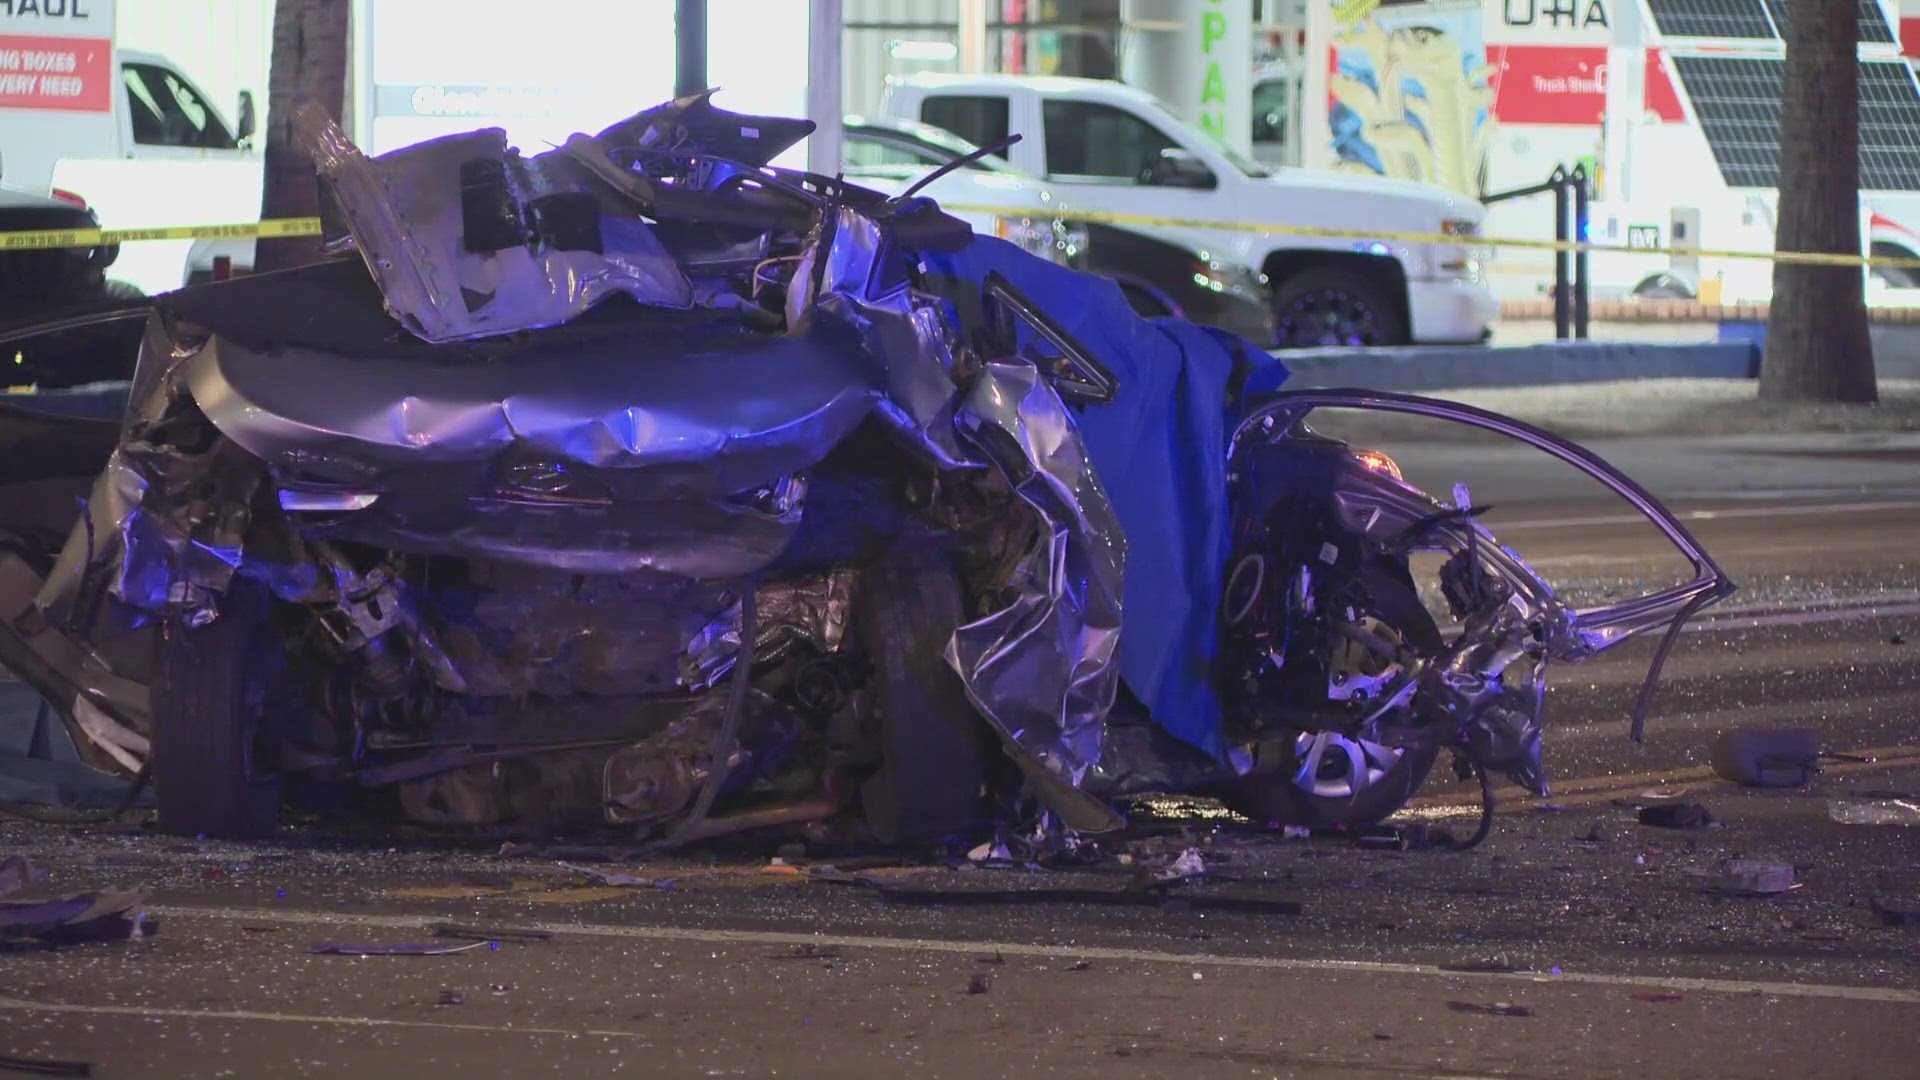 The driver of a car hit the bus first, then spun and hit a truck, police say.